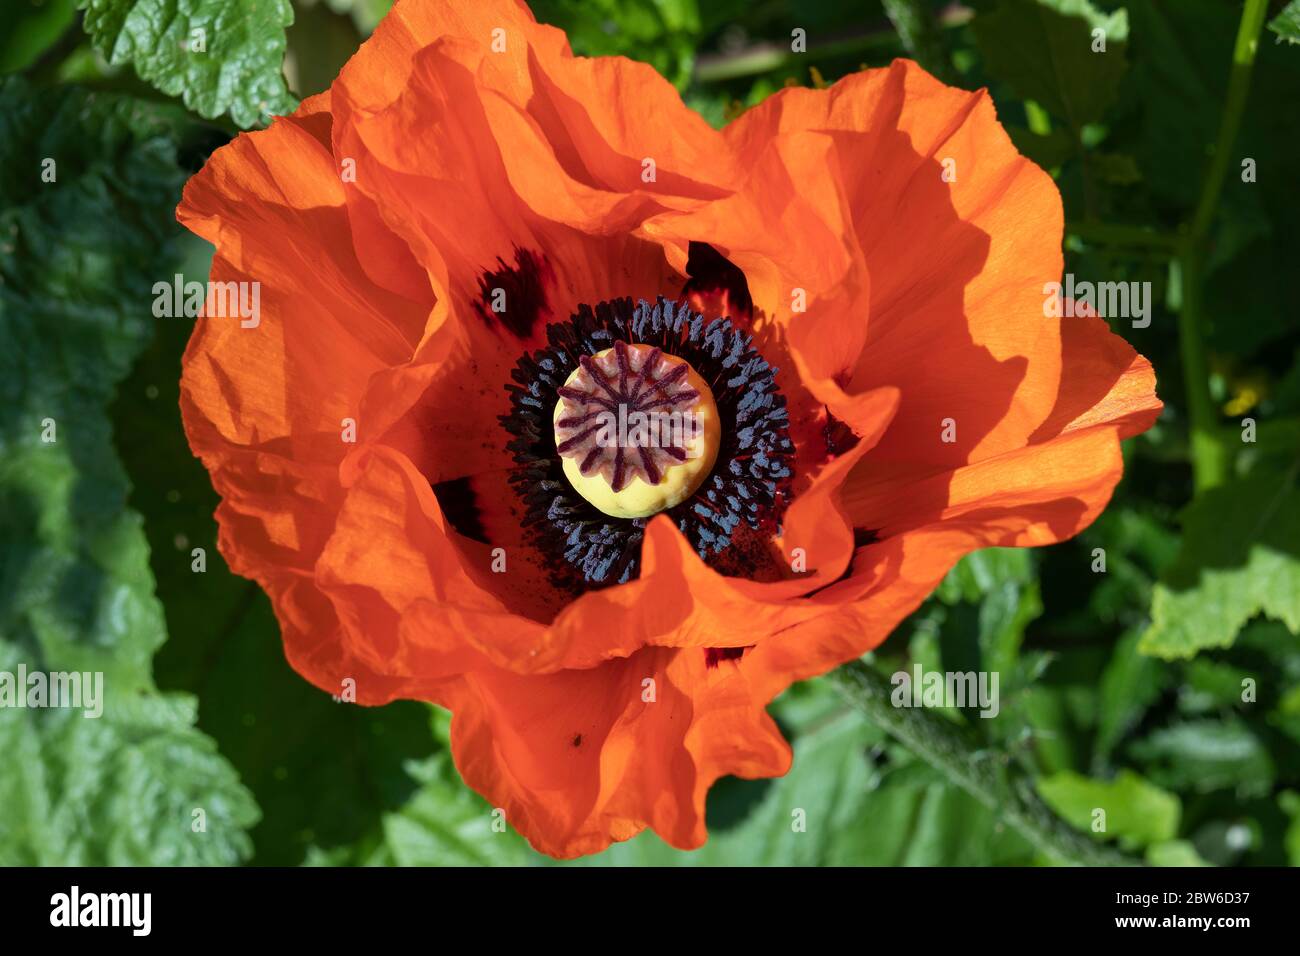 Red flowering poppy close up Stock Photo